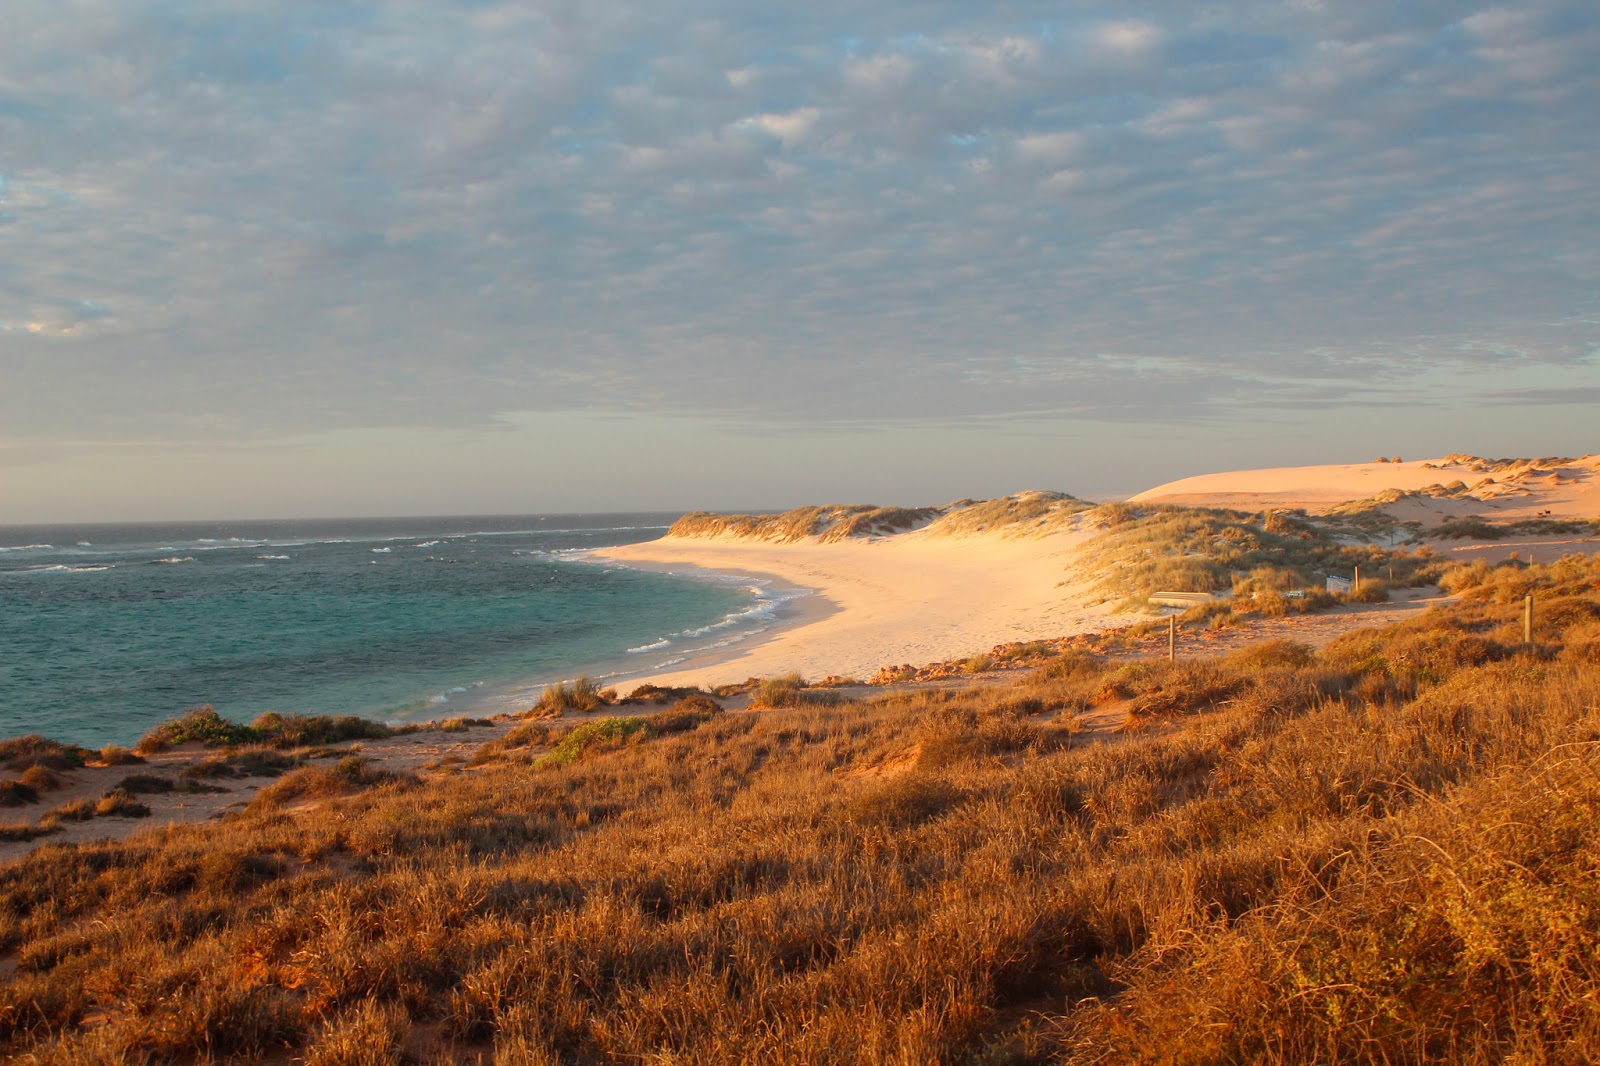 For fun, love and adventure: Gnaraloo Station - our first taste of the ...